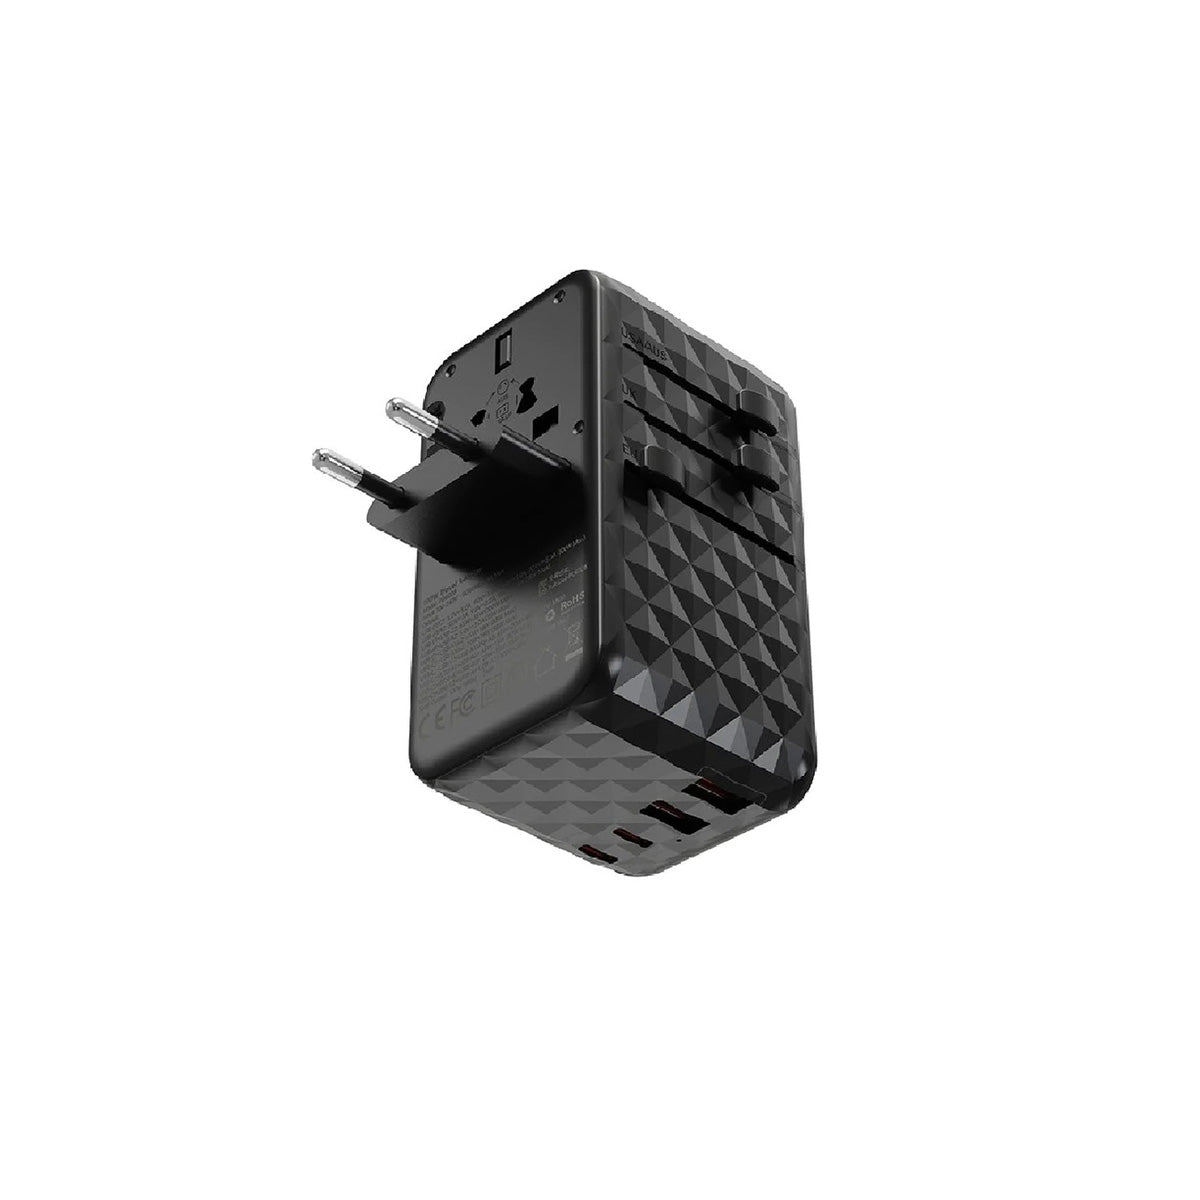 Choetech PD100W Travel Wall Charger PD6028 (Black)